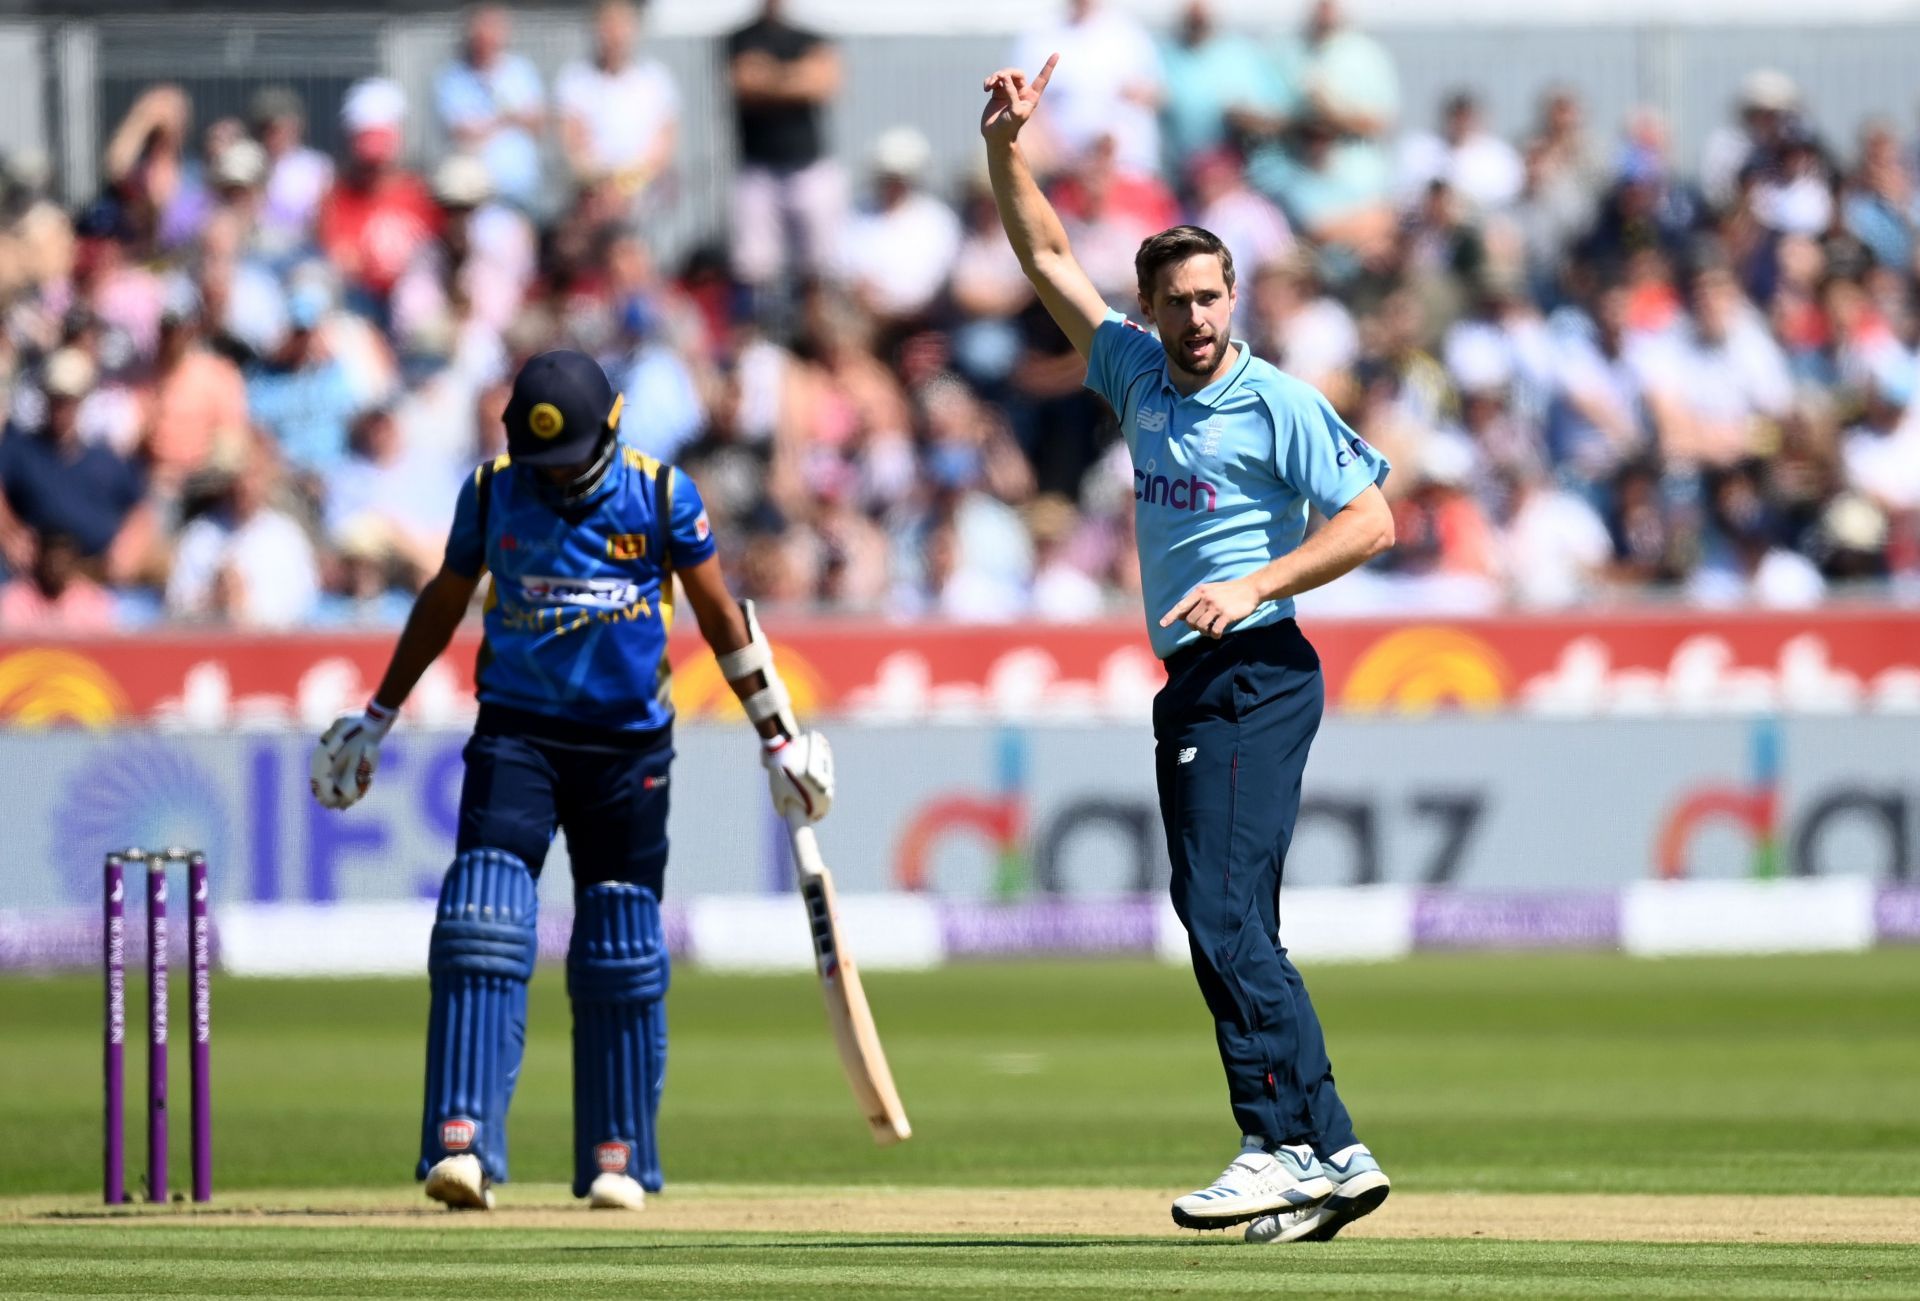 England vs Sri Lanka is an important match for all Group 1 teams